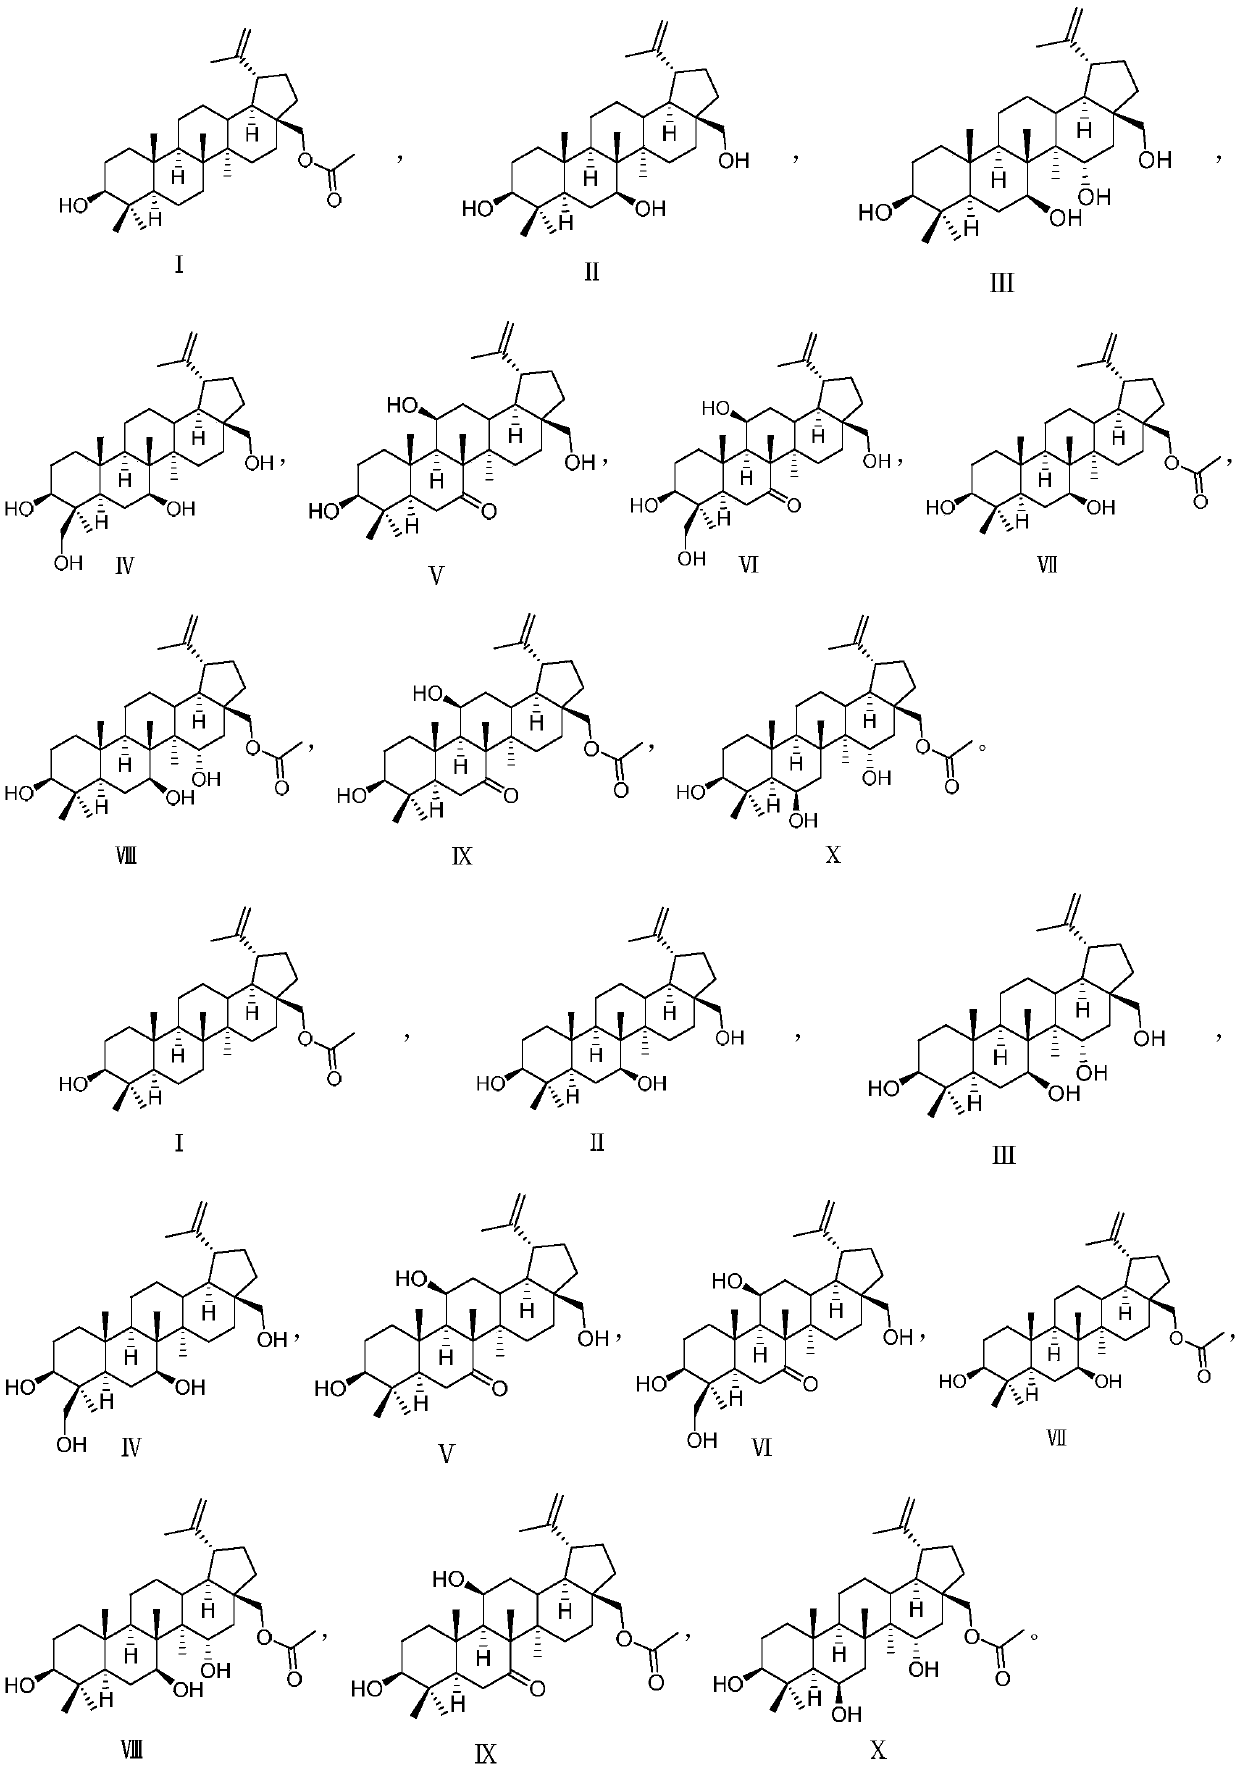 Novel application of betulin derivatives in preparation of drugs for repairing nerve injury